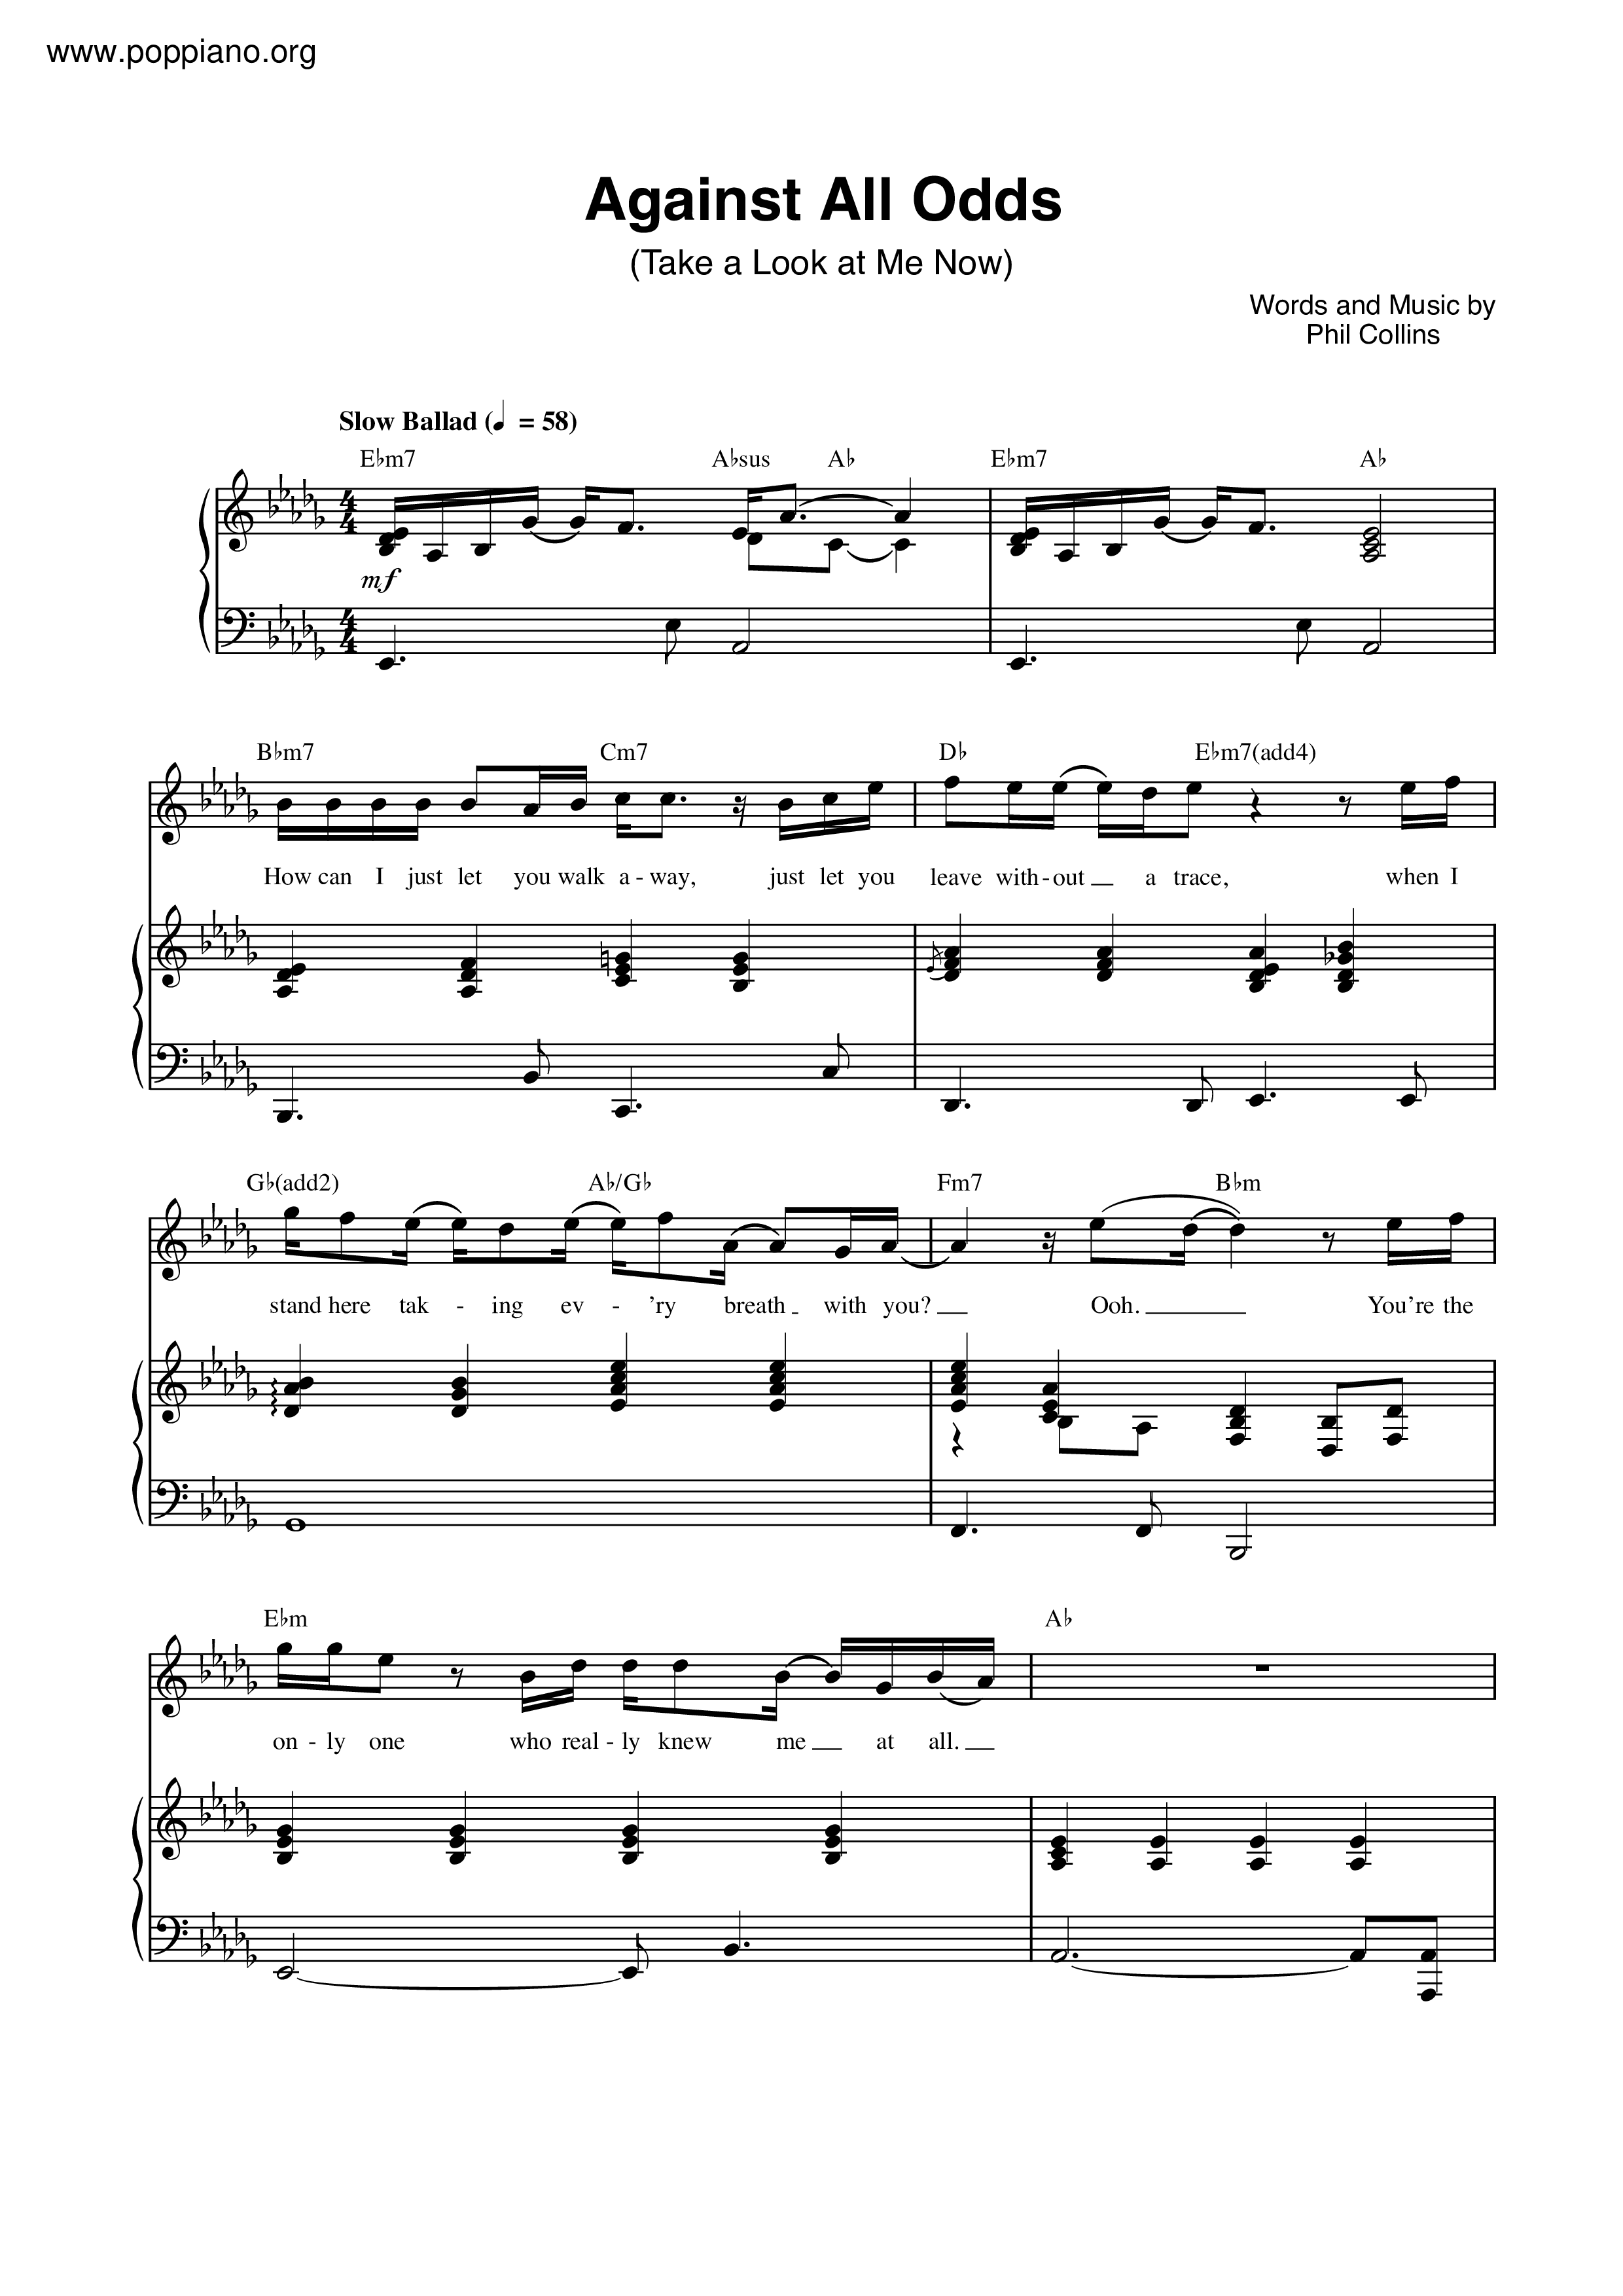 phil-collins-against-all-odds-take-a-look-at-me-now-sheet-music-pdf